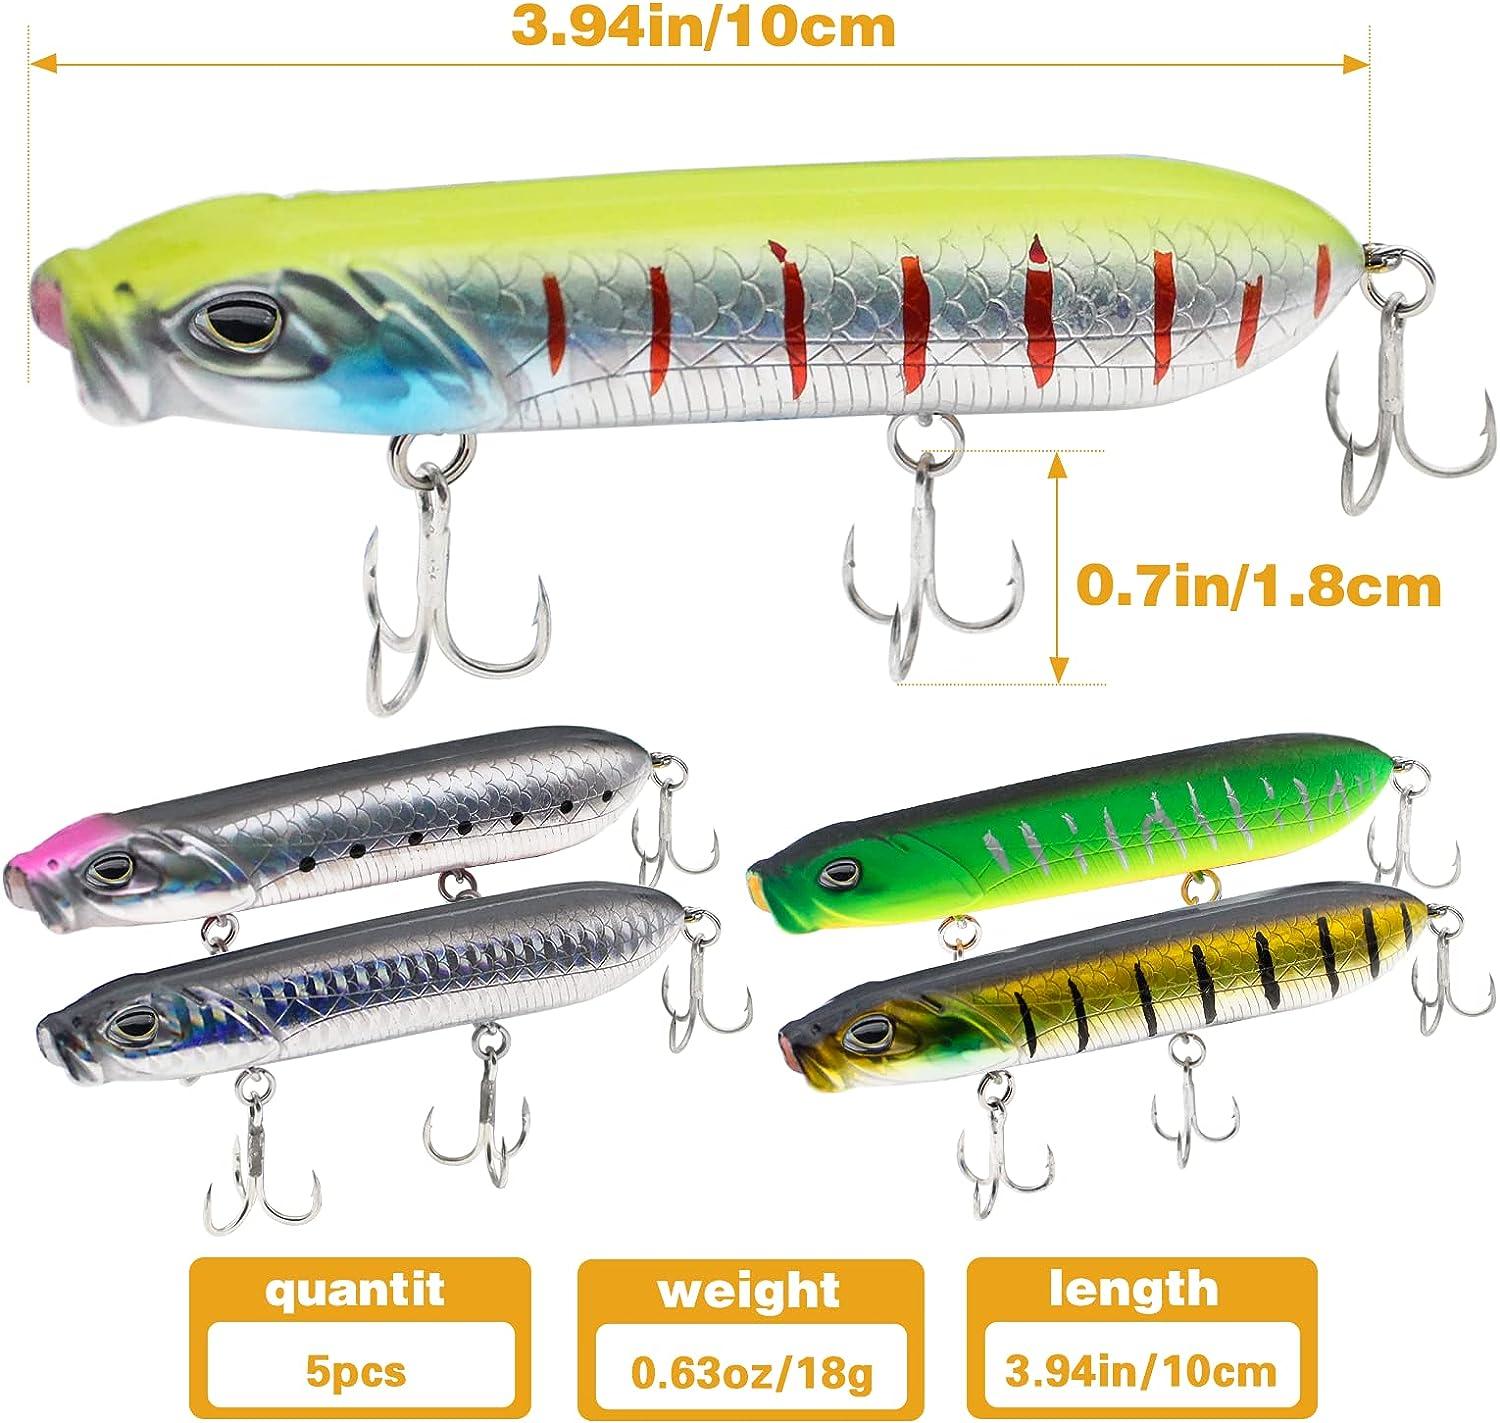 LotFancy 30 PCS Fishing Lures Crankbaits with Treble Hook Topwater Baits, Bass  Minnow Popper Walleye Baits, Length from 1.57 to 3.66 Inches